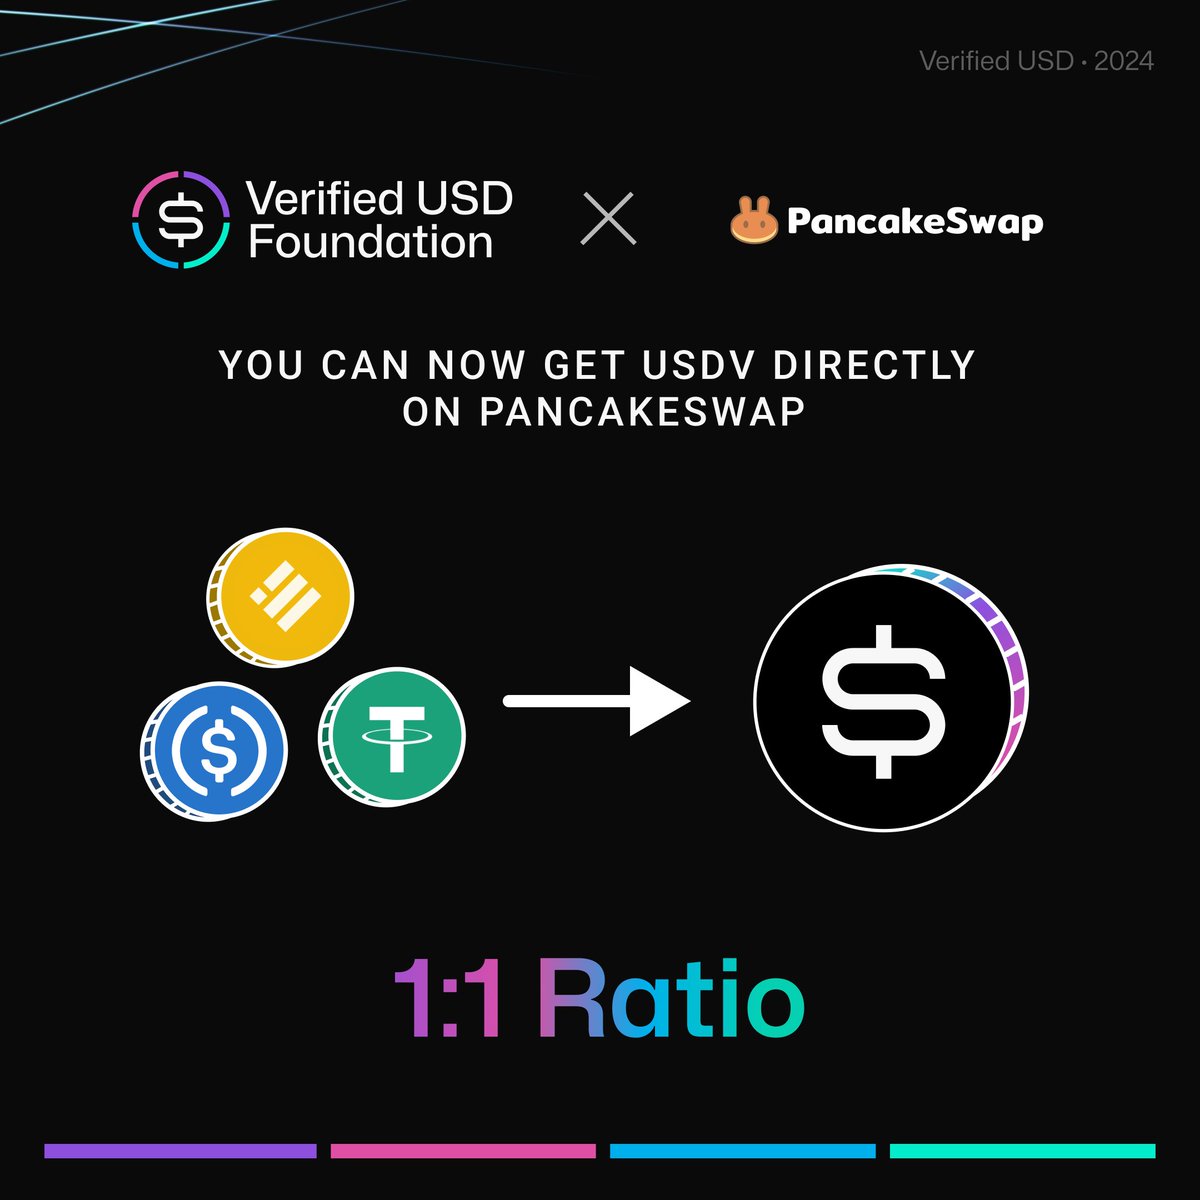 We are thrilled to announce that you can now get USDV directly on @PancakeSwap! 💰 Swap BUSD, USDT, or USDC for USDV at a 1:1 ratio (no slippage!) and enjoy improved flexibility with effortless cross-chain transfers. Get your hands on USDV today via: pancakeswap.finance/usdv